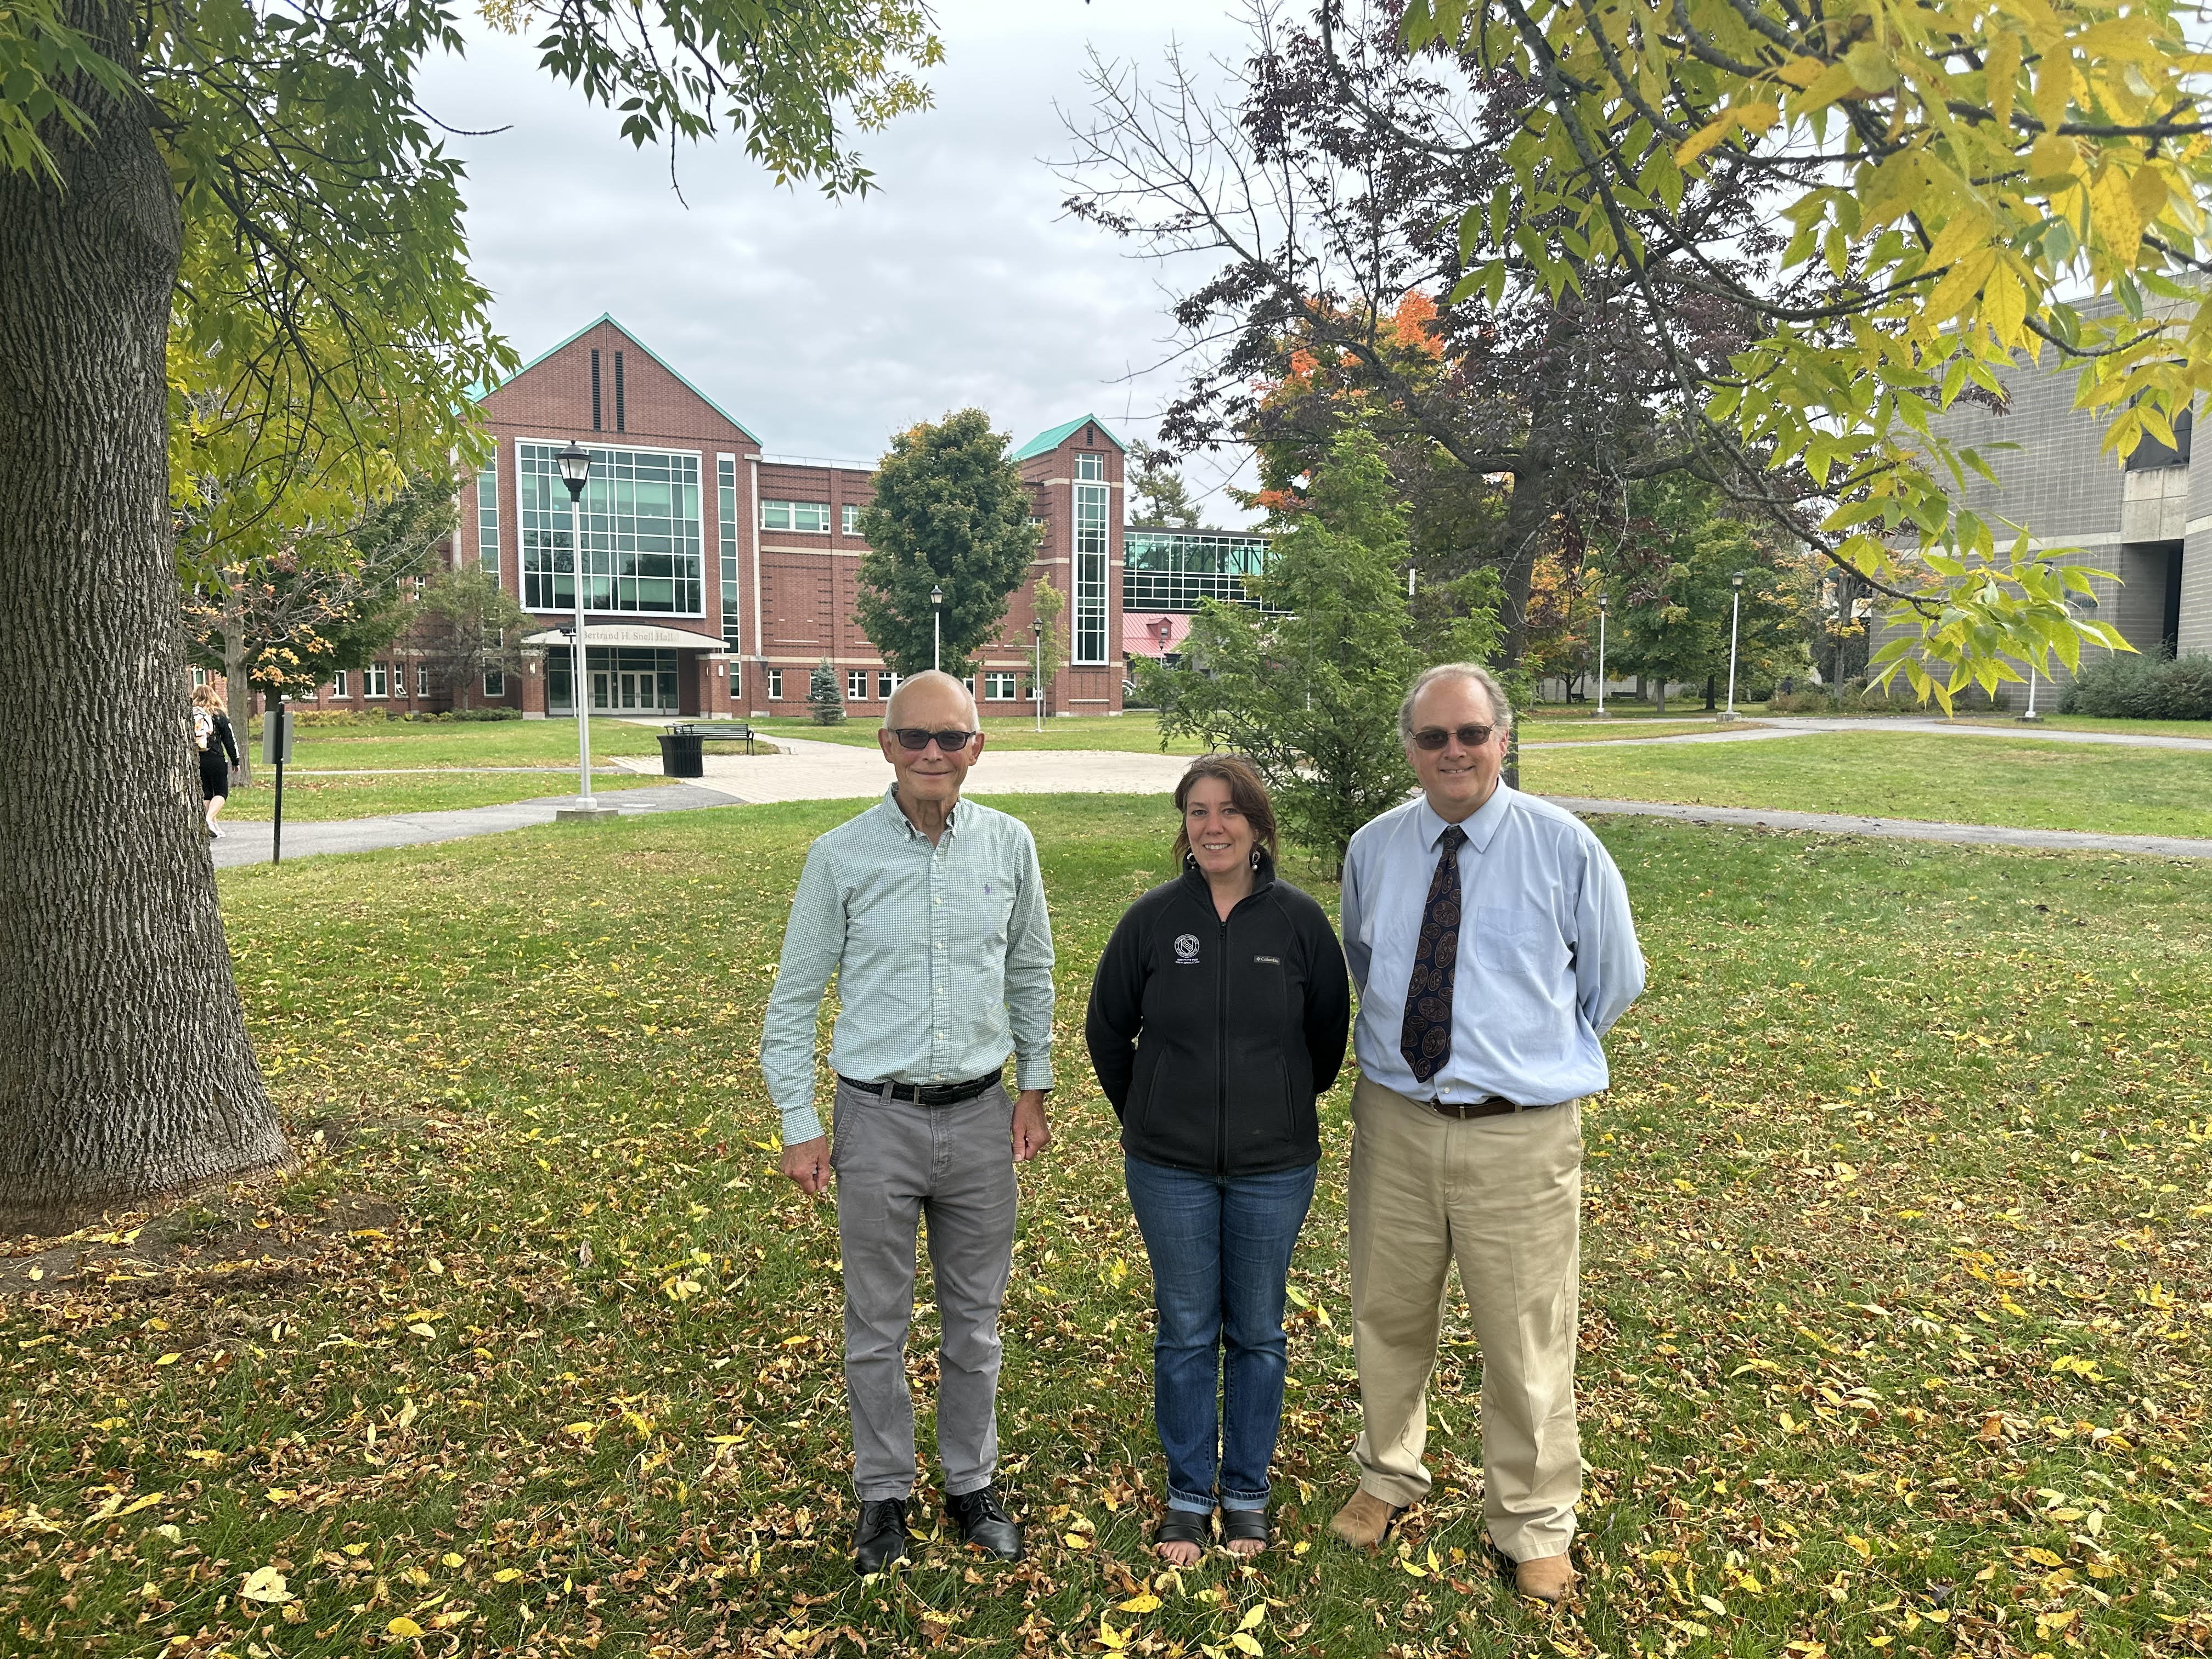 Portrait of Robert Dowman, Katie Kavanagh and Lennart Johns outside Snell Hall on the Clarkson University Collins Hill Campus